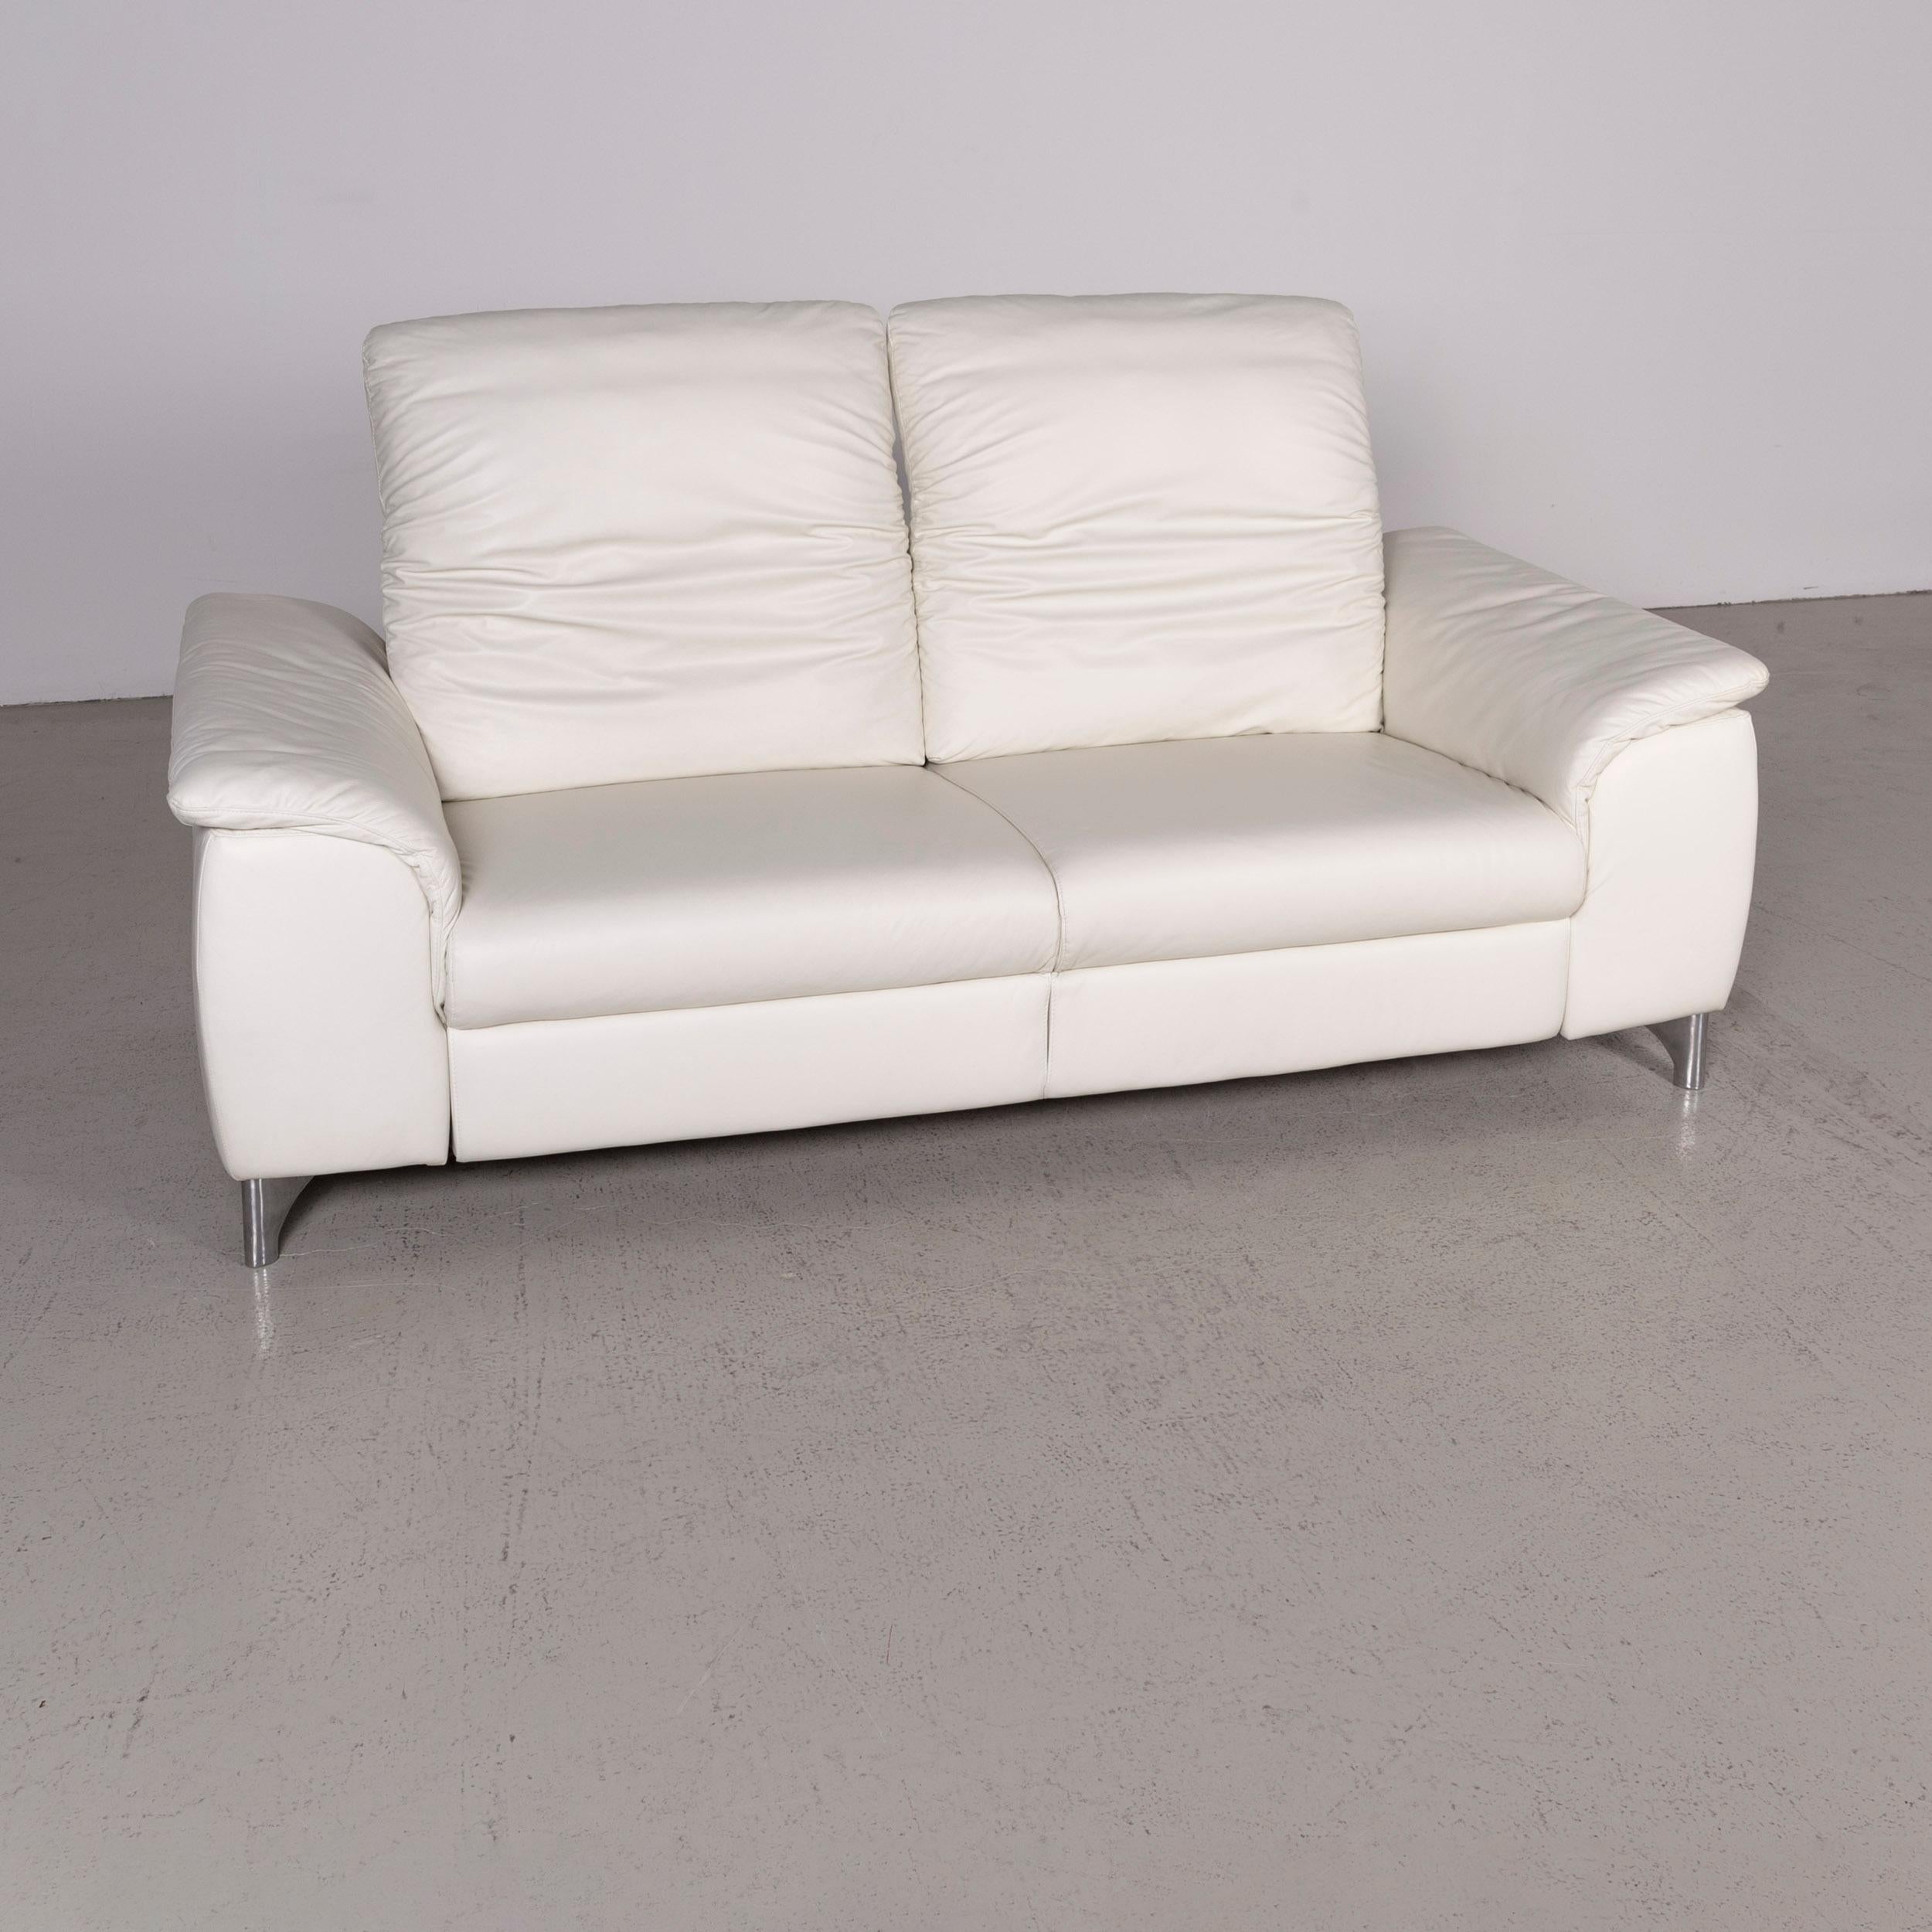 We bring to you a Willi Schillig Sinaatra designer leather sofa white genuine leather two-seat.
 

Product measures in centimeters:

Depth: 100
Width: 210
Height: 95
Seat-height: 45
Rest-height: 65
Seat-depth: 55
Seat-width: